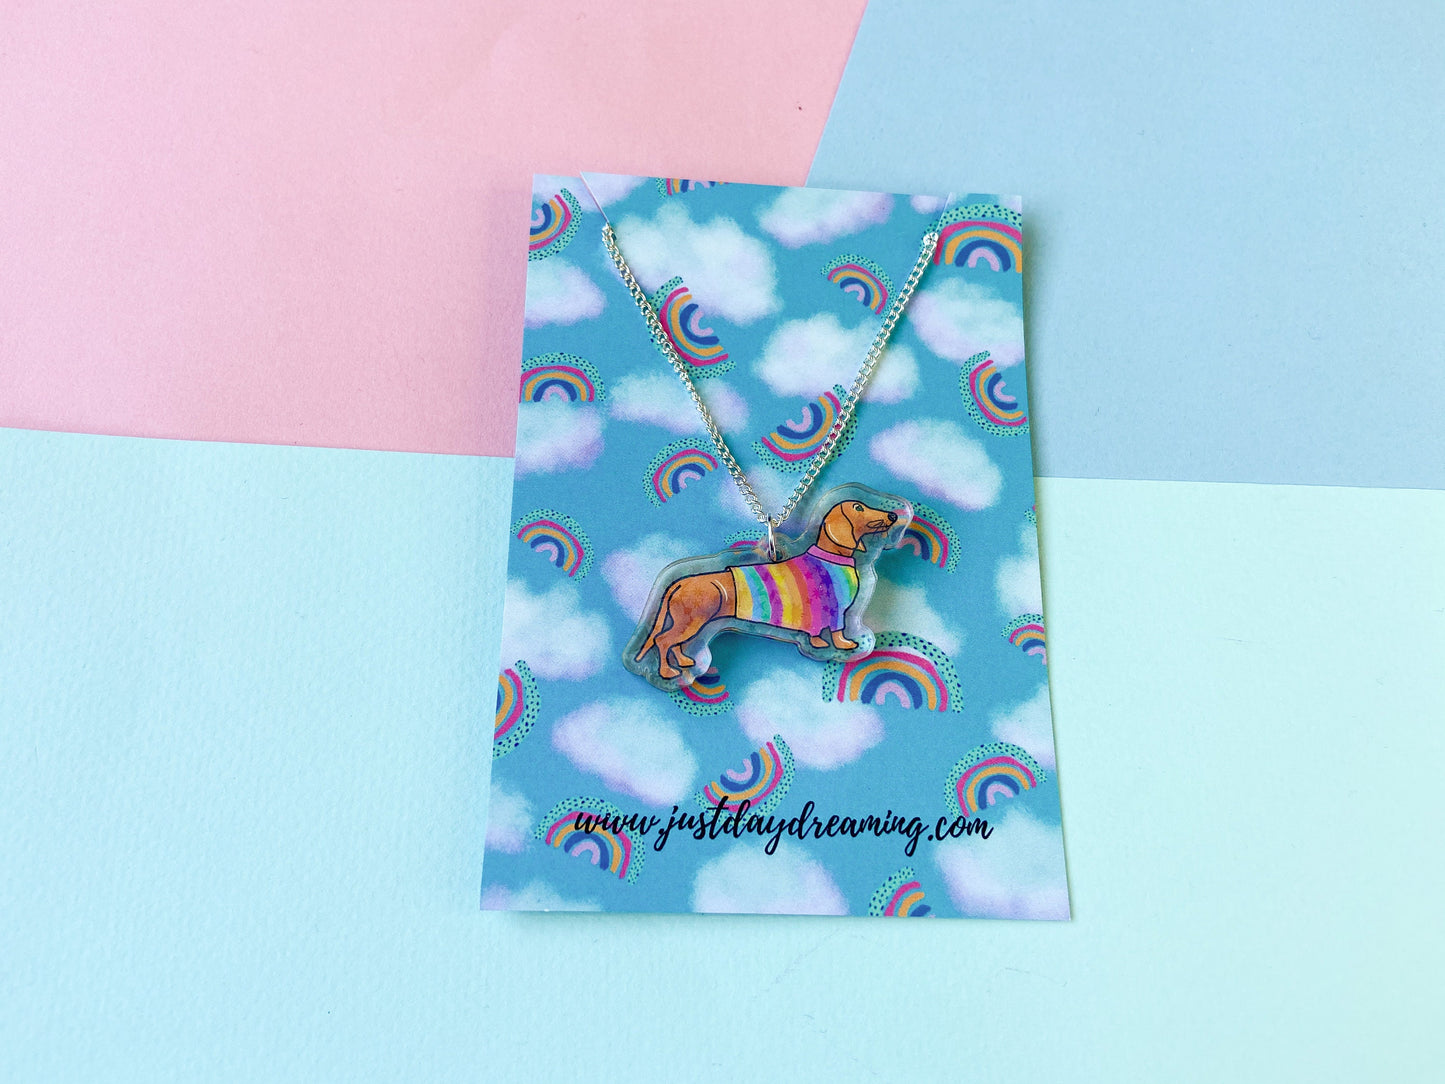 Sausage Dog Necklace, Colourful Dachshund Jewellery